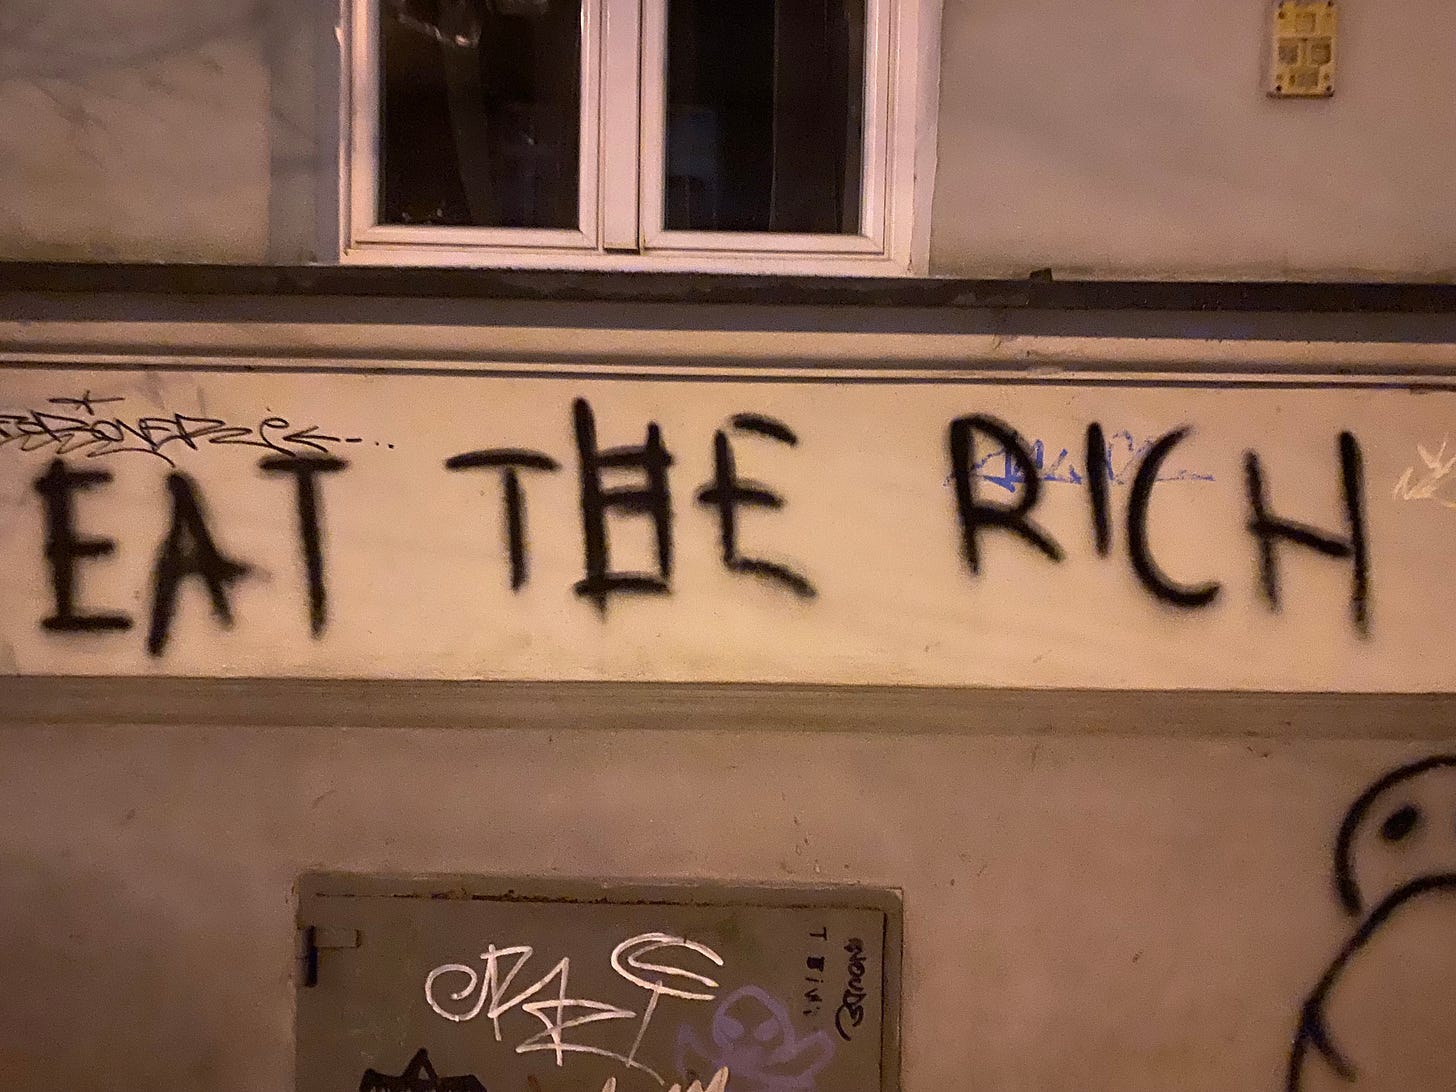 Graffiti, with the text saying "EAT THE RICH"